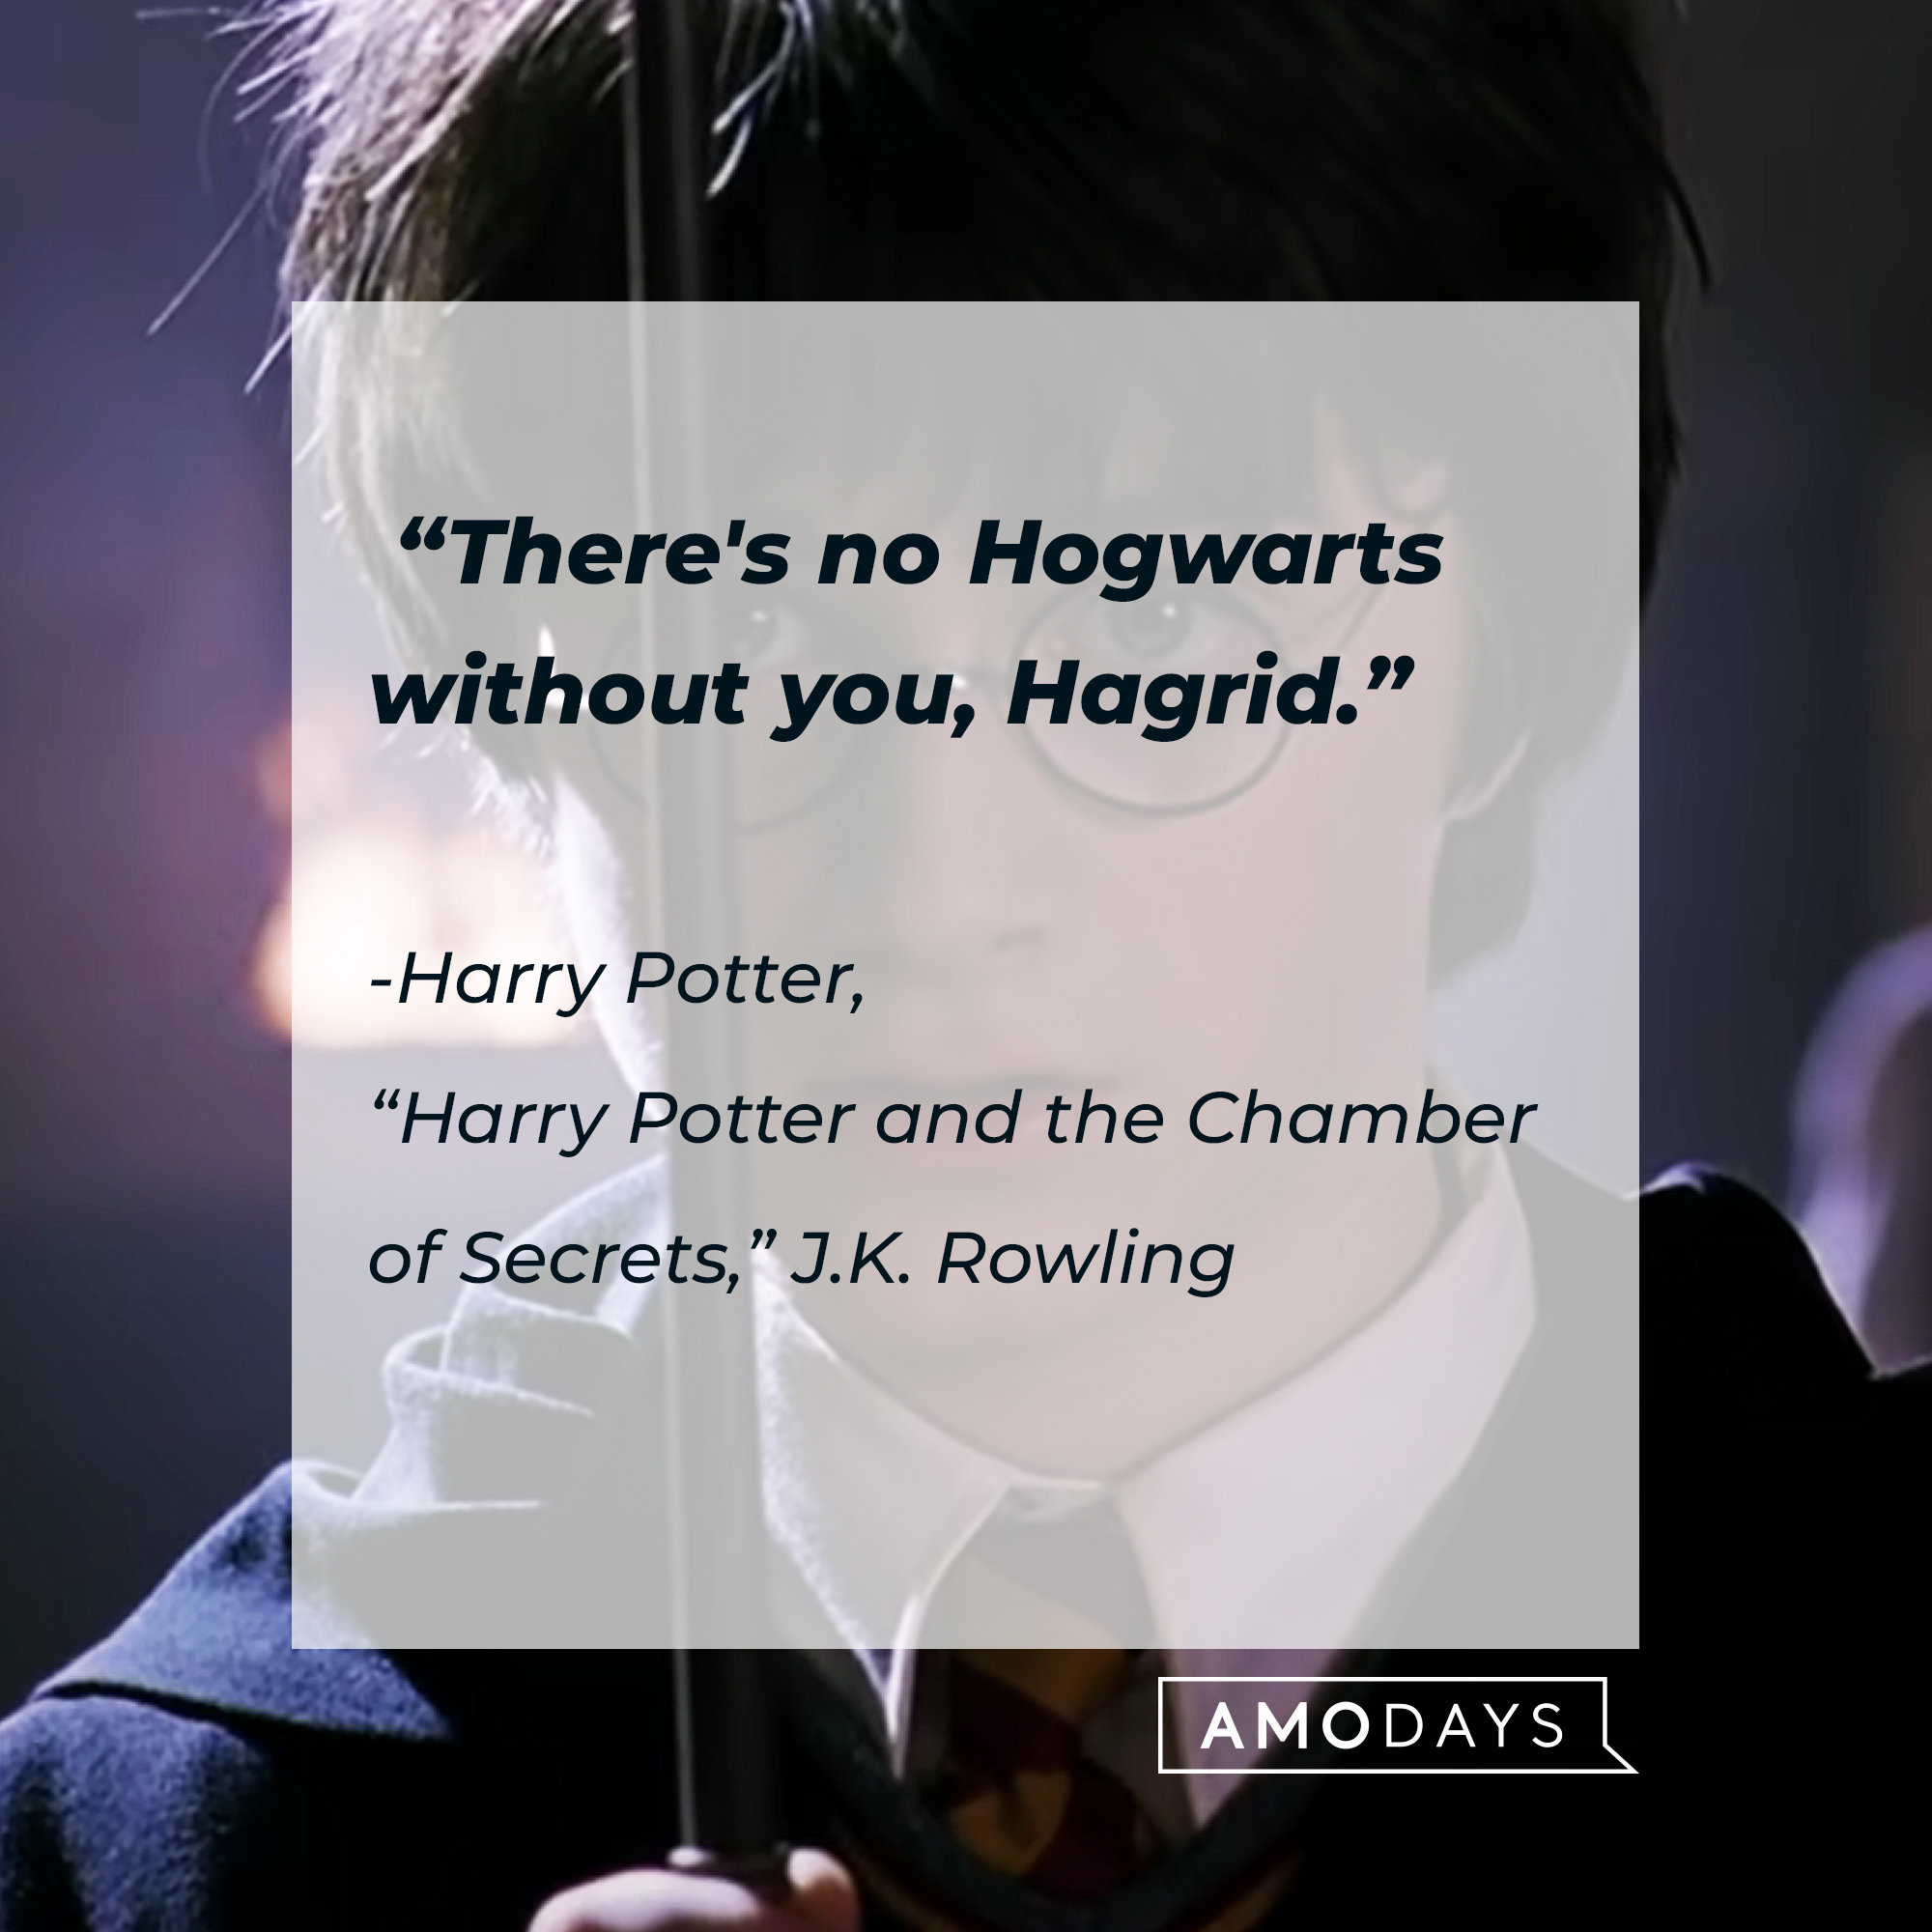 An image of Harry Potter with his quote: "There's no Hogwarts without you, Hagrid.” | Source: Youtube.com/harrypotter